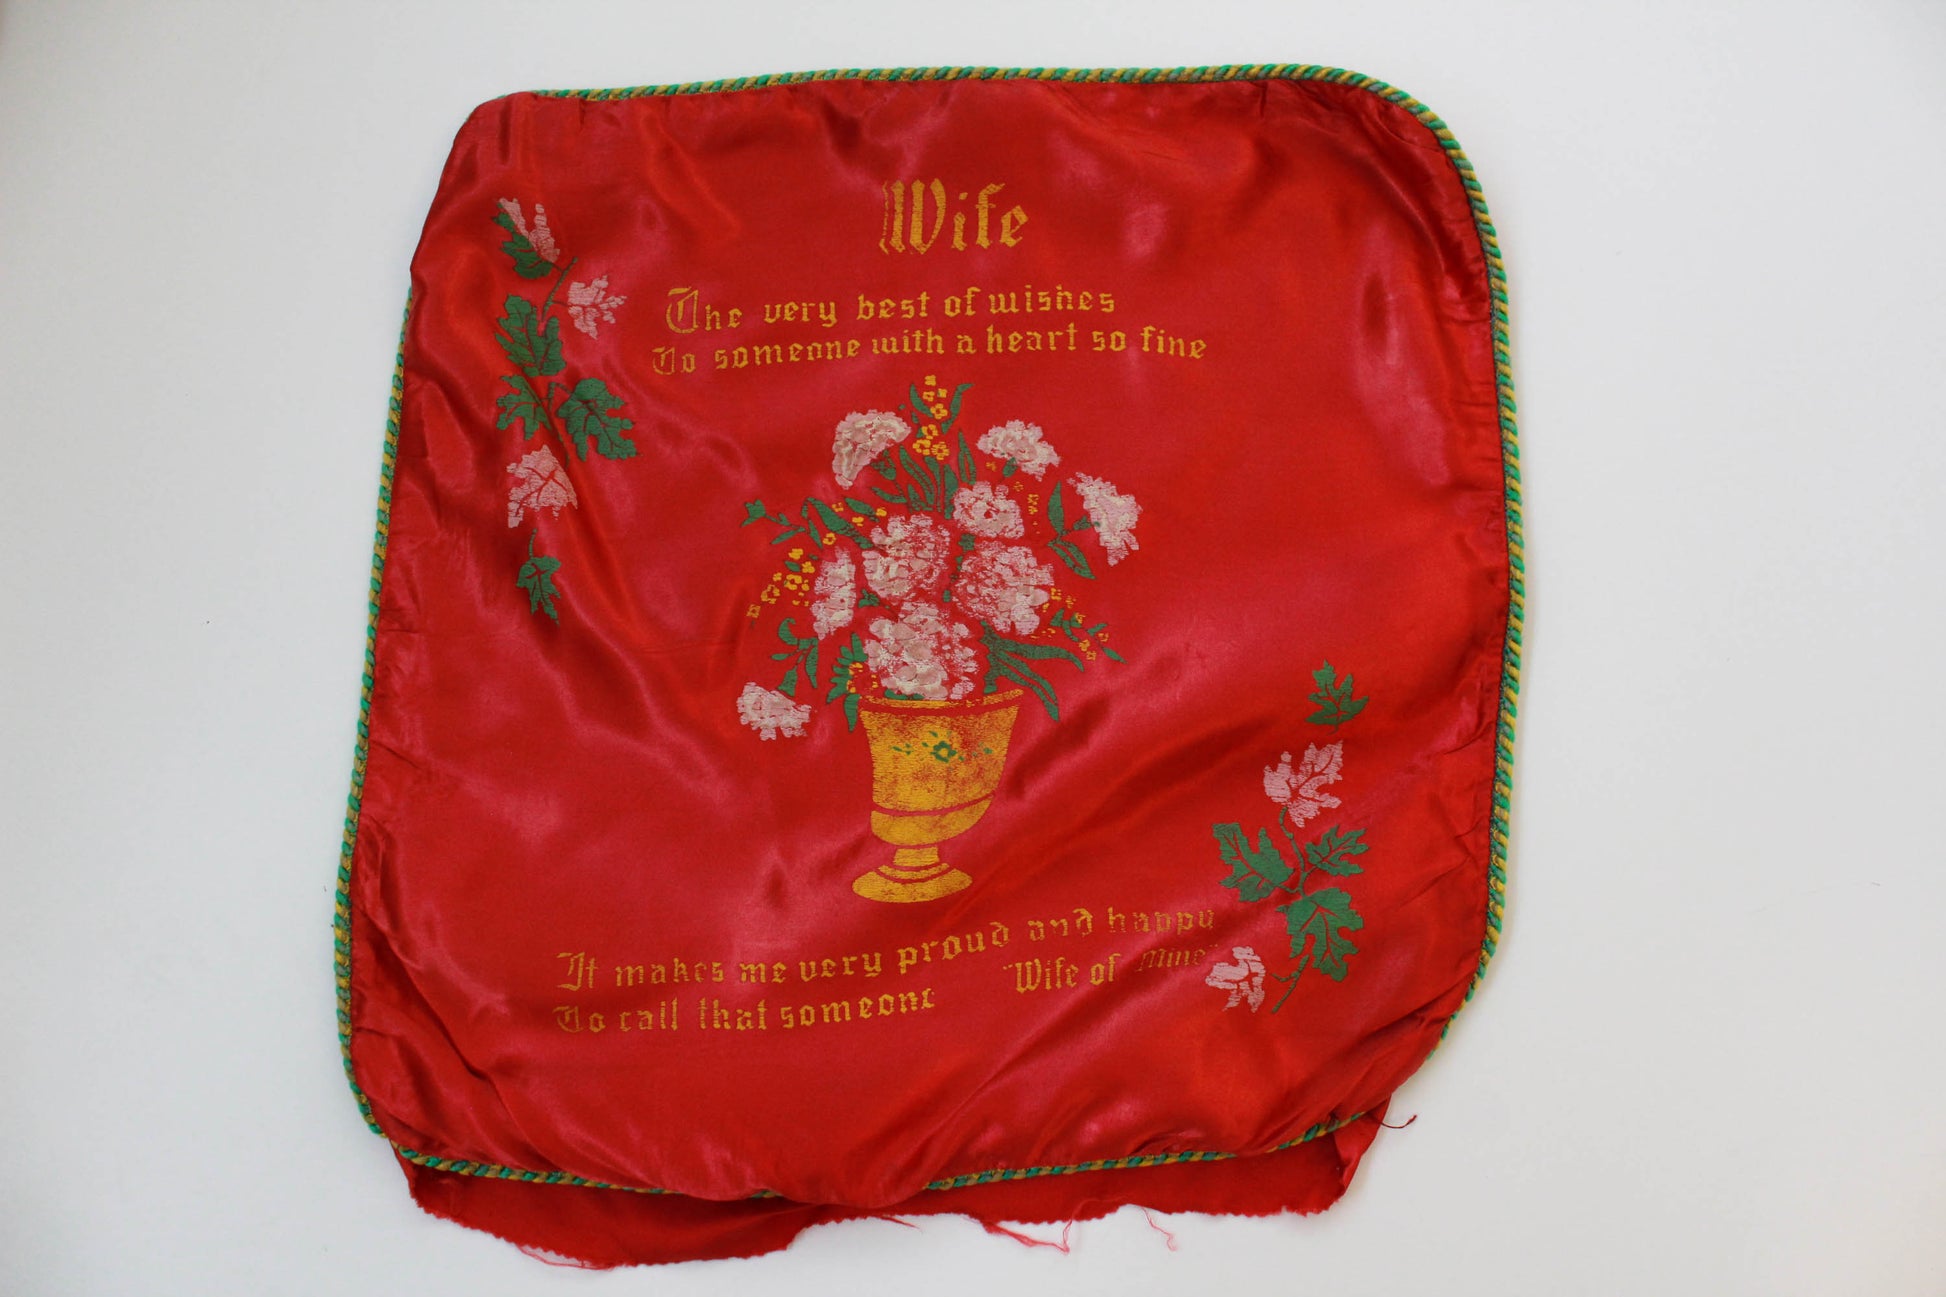 1940s rayon satin hand painted bouquet souvenir pillowcase with wife love poem, wwii era  